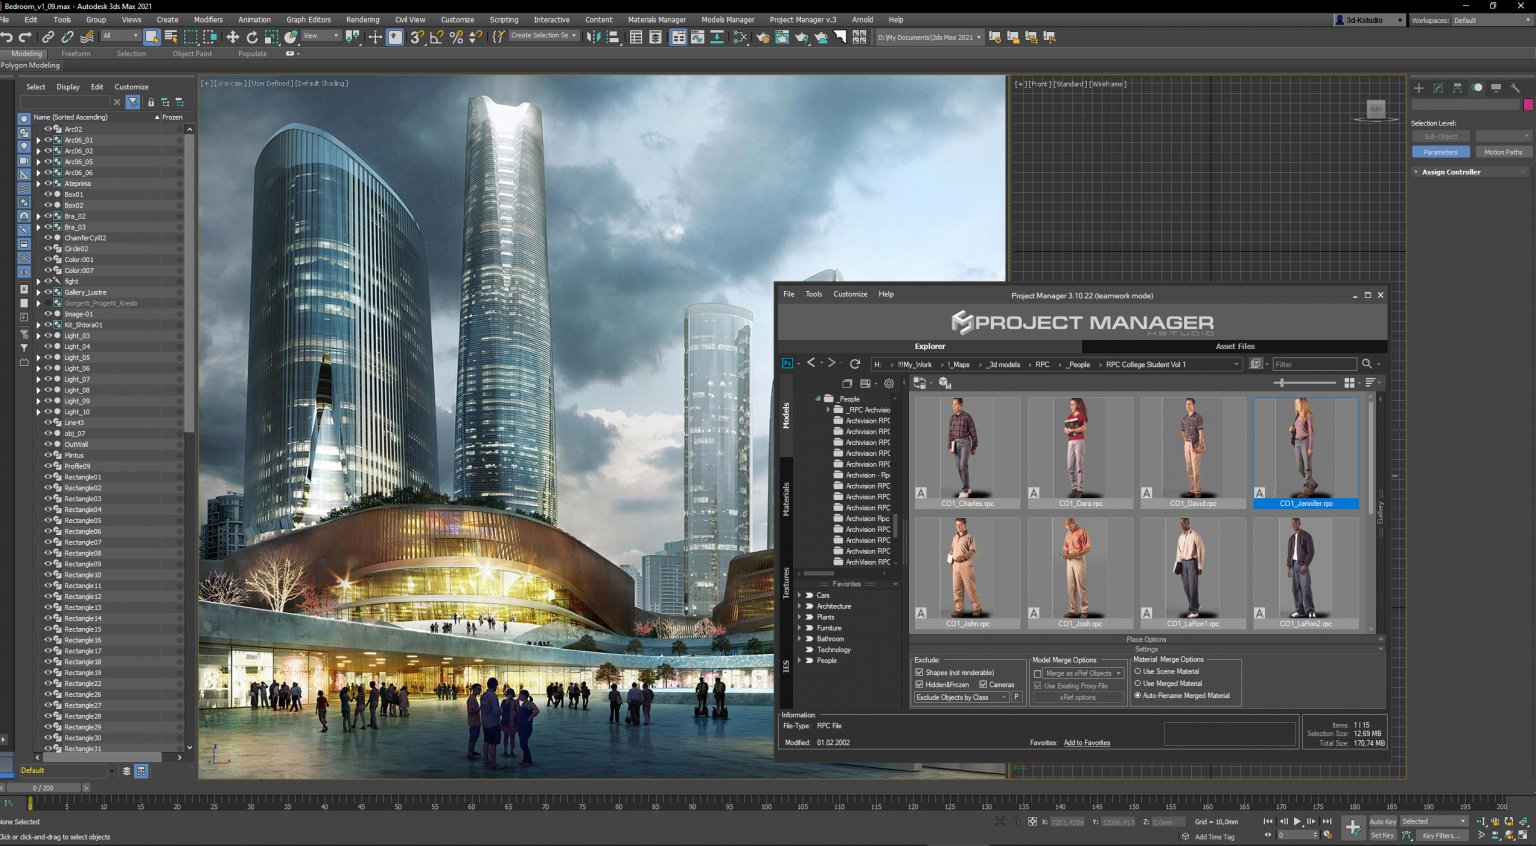 Merge and Manage 3D using Project Manager | Kstudio - 3ds Max Plugins & Scripts